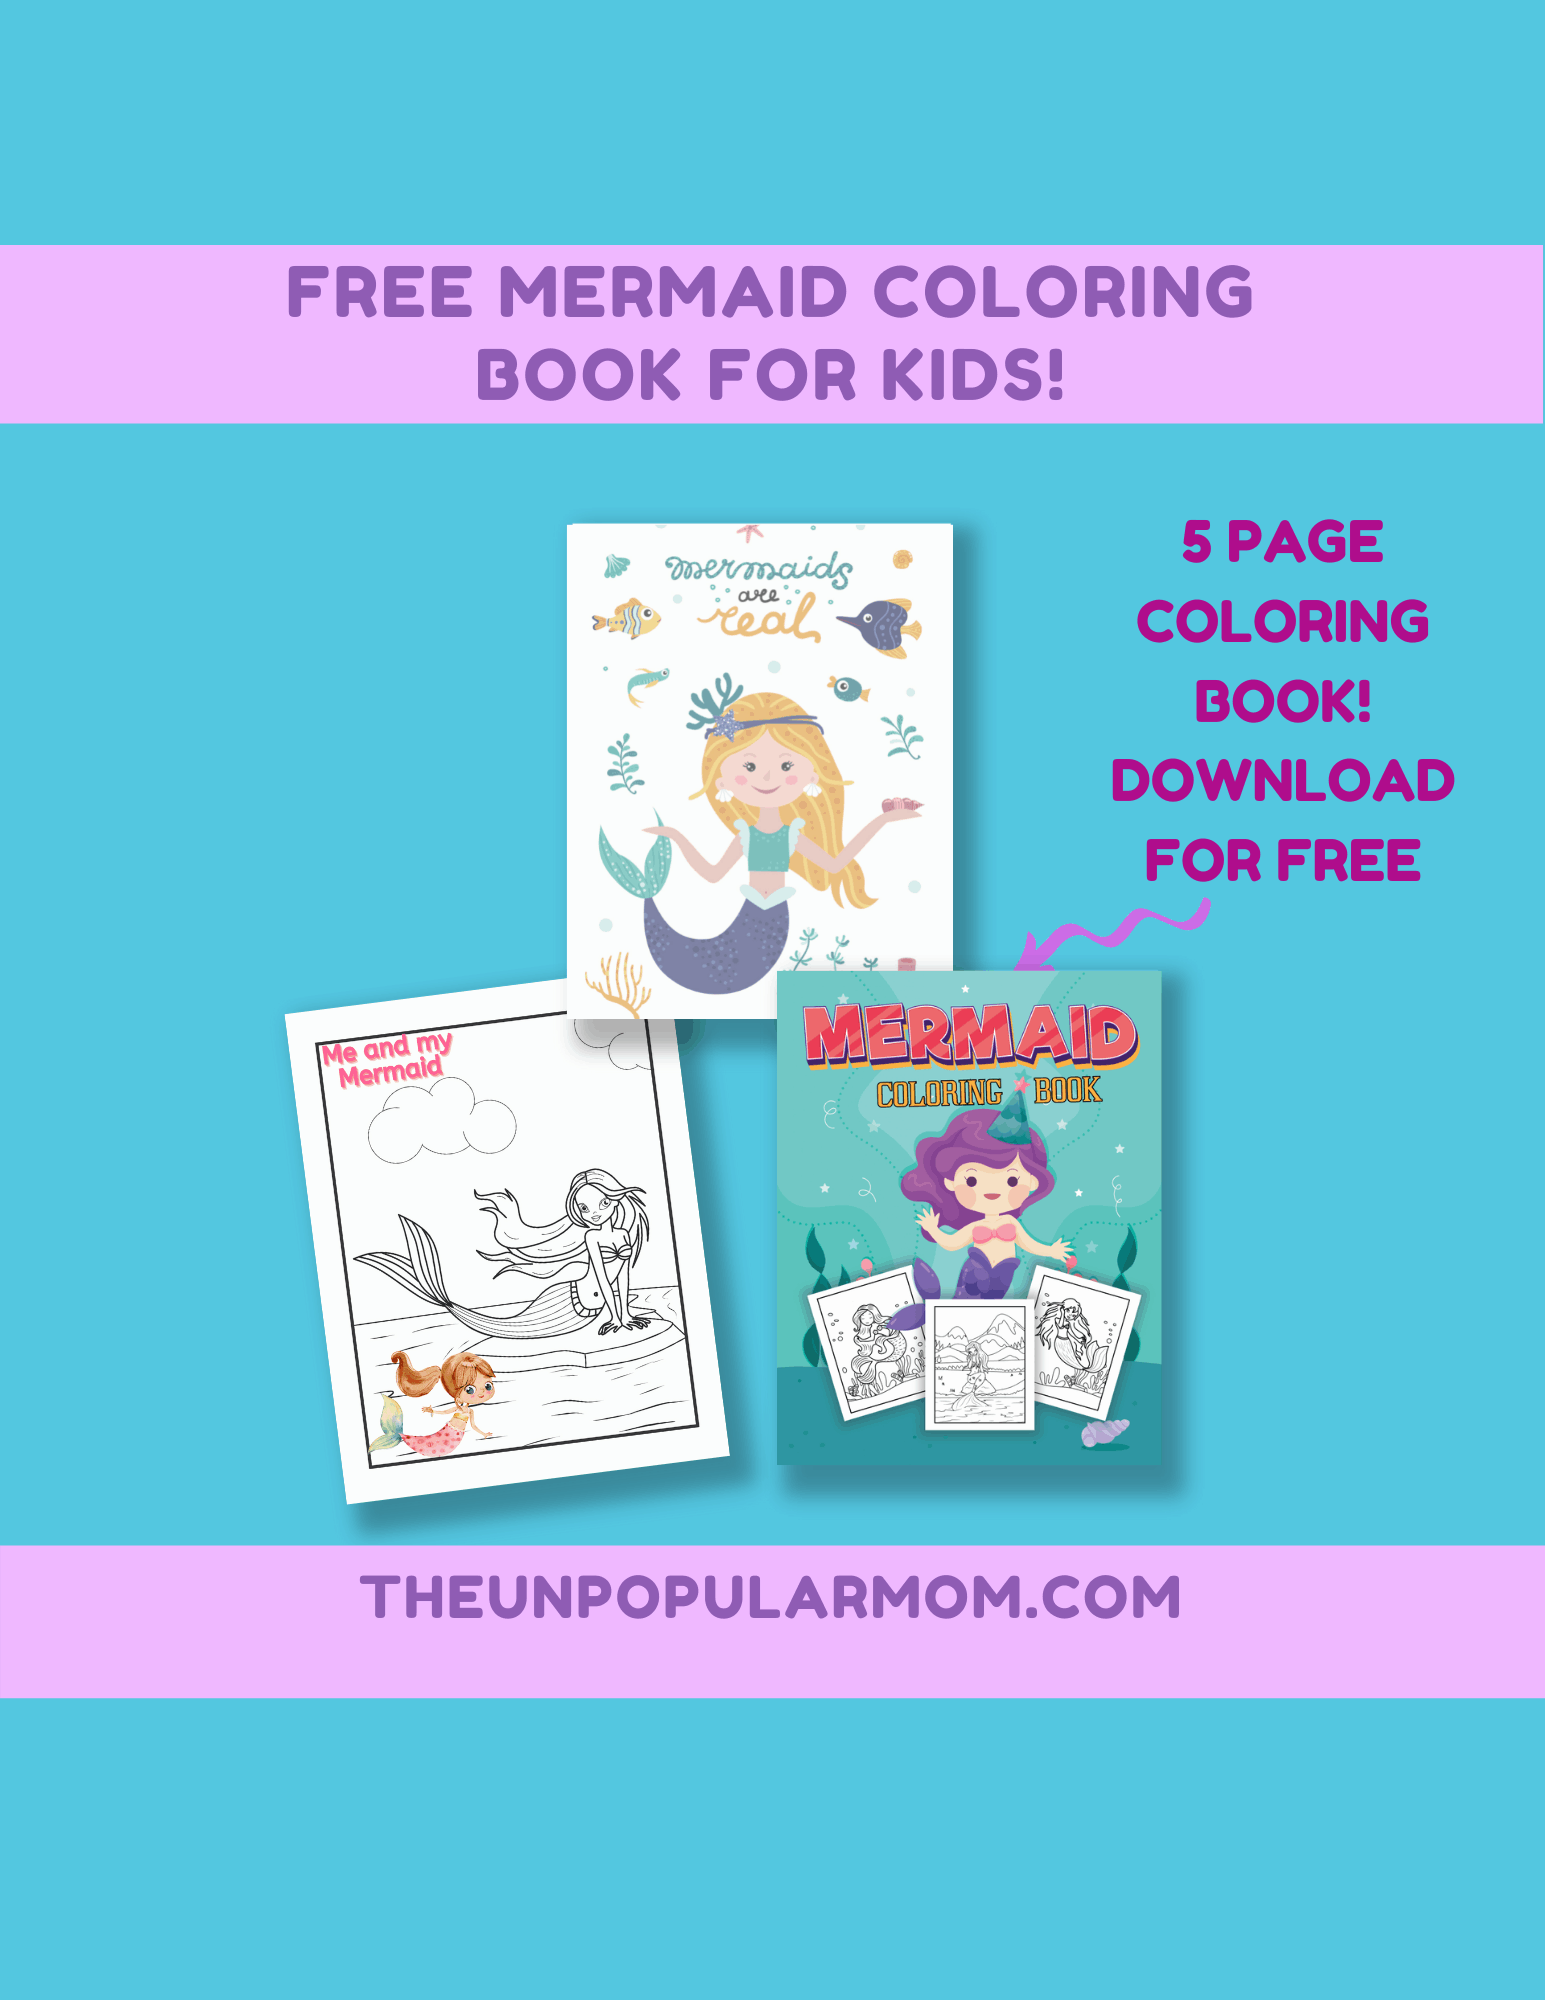 FREE MERMAID COLORING PAGES FOR KIDS!